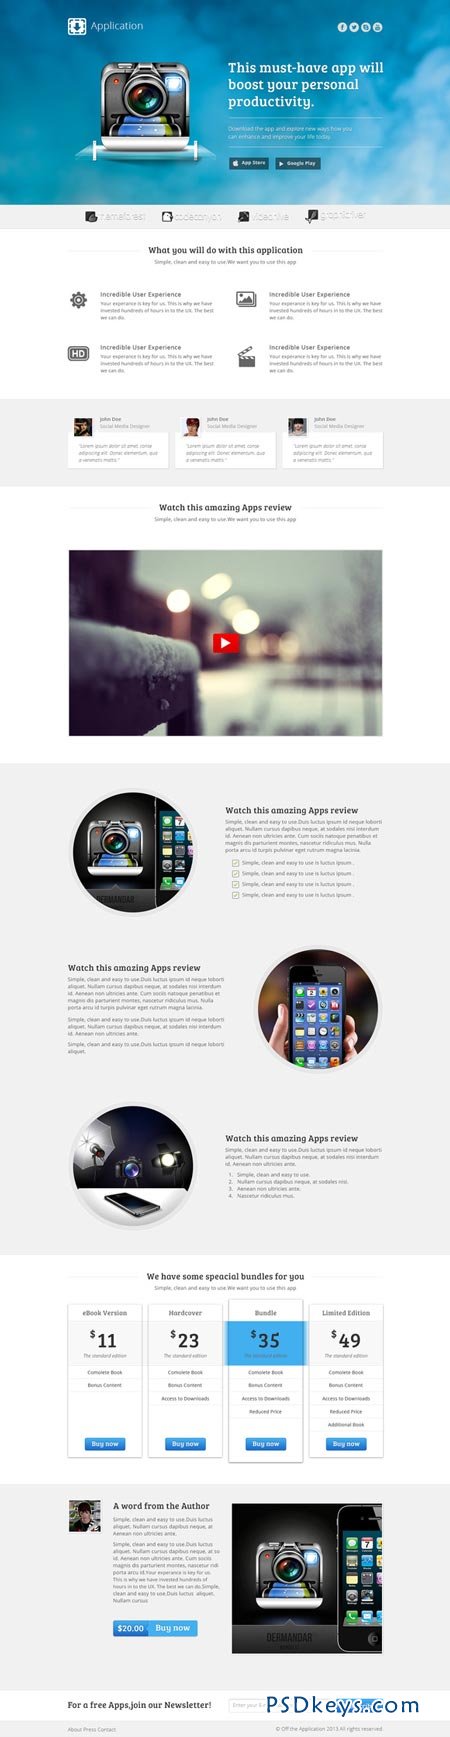 Application - Landing page for apps 4400